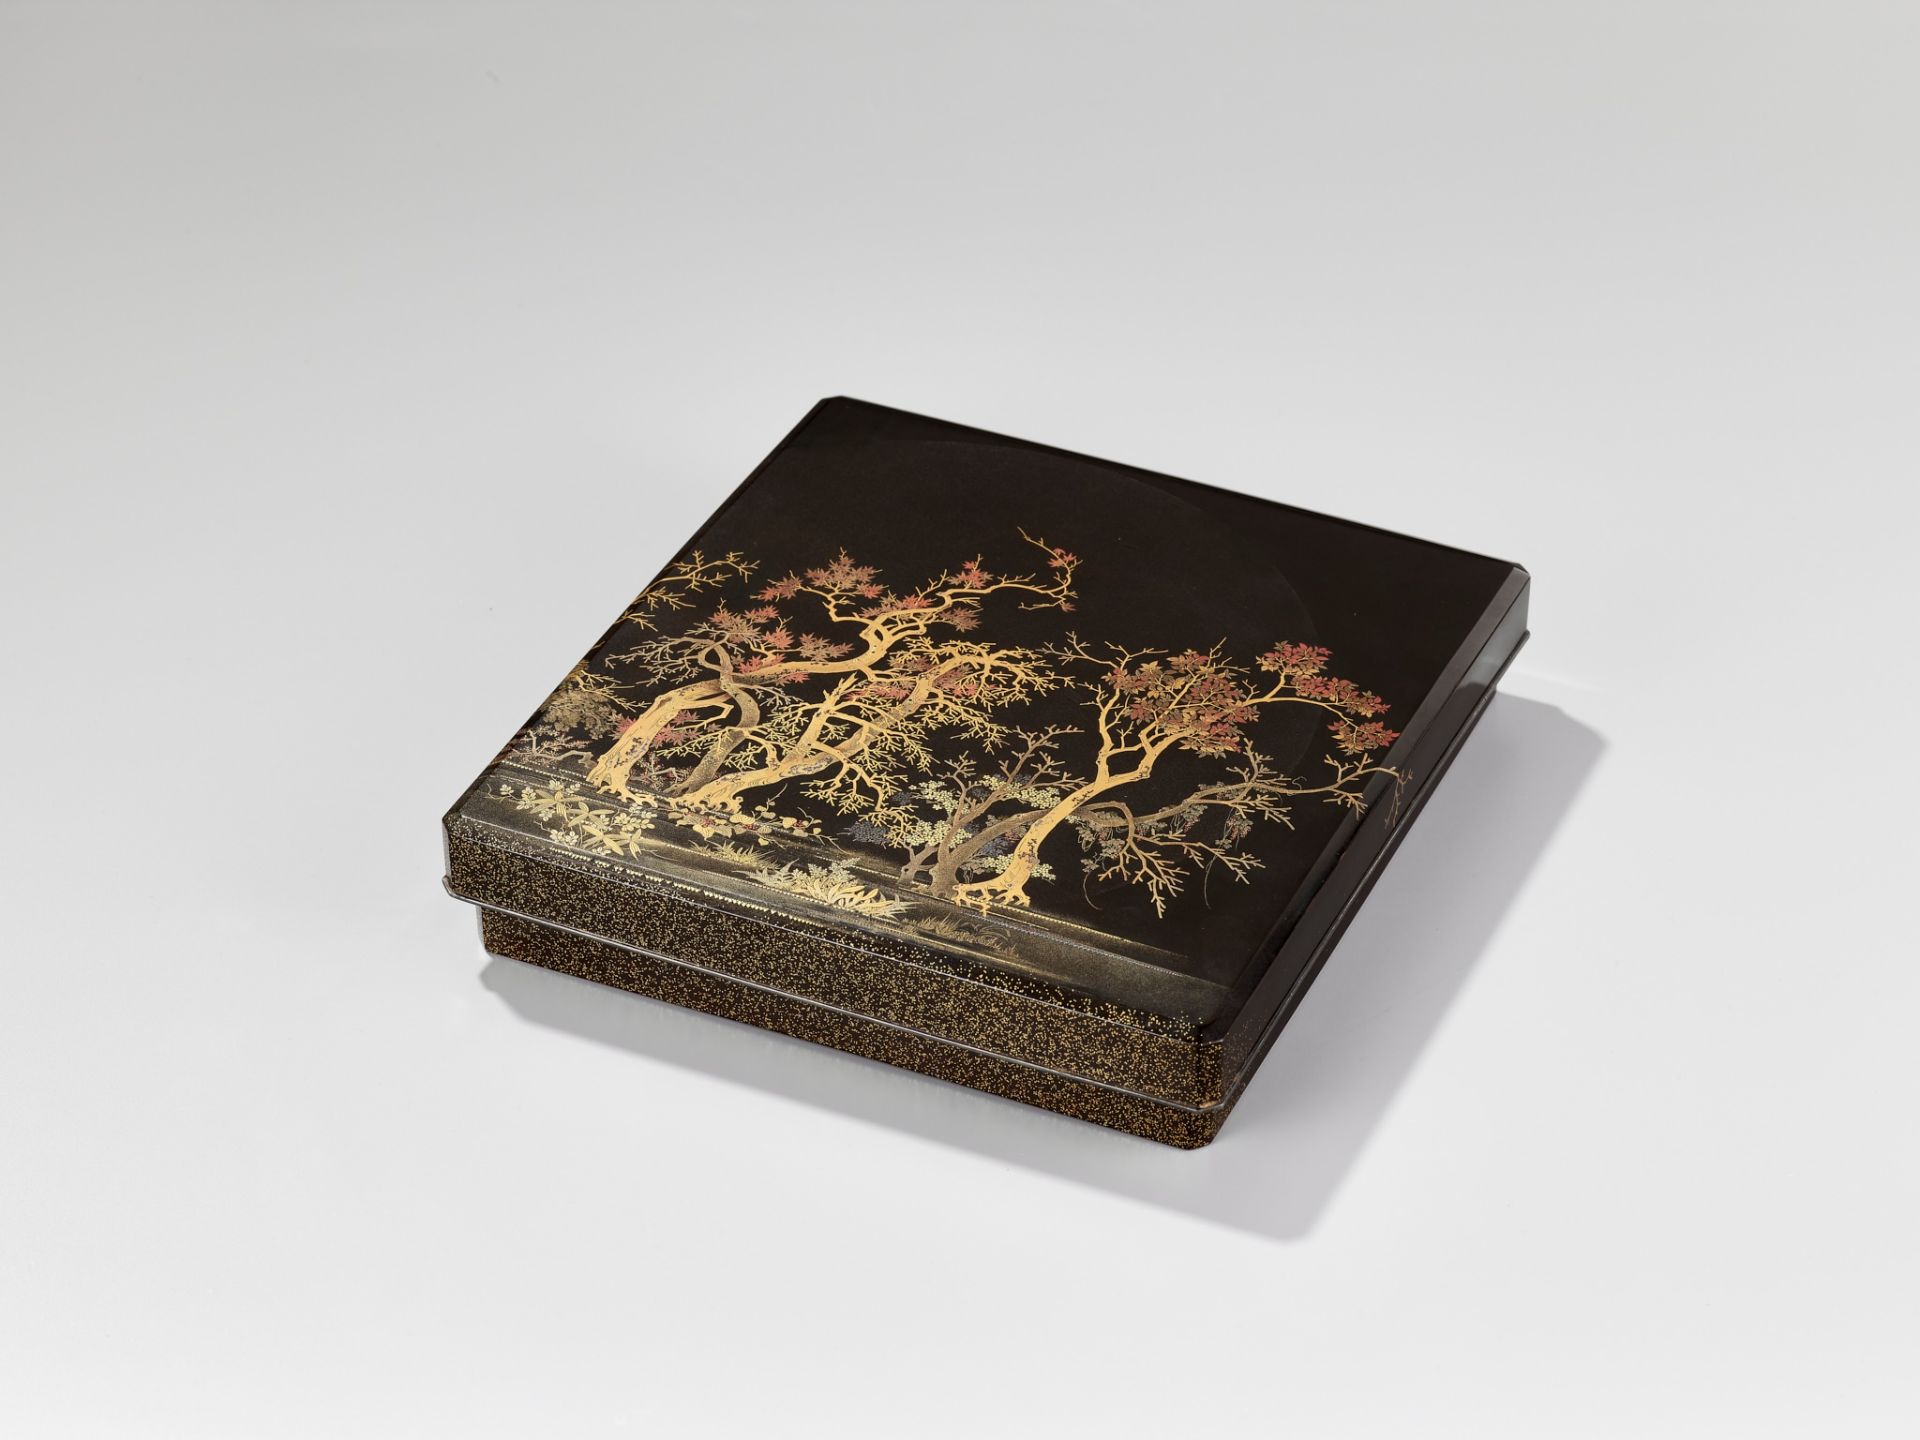 A SUPERB LACQUER SUZURIBAKO (WRITING BOX) DEPICTING A MOONLIT FOREST - Image 7 of 15